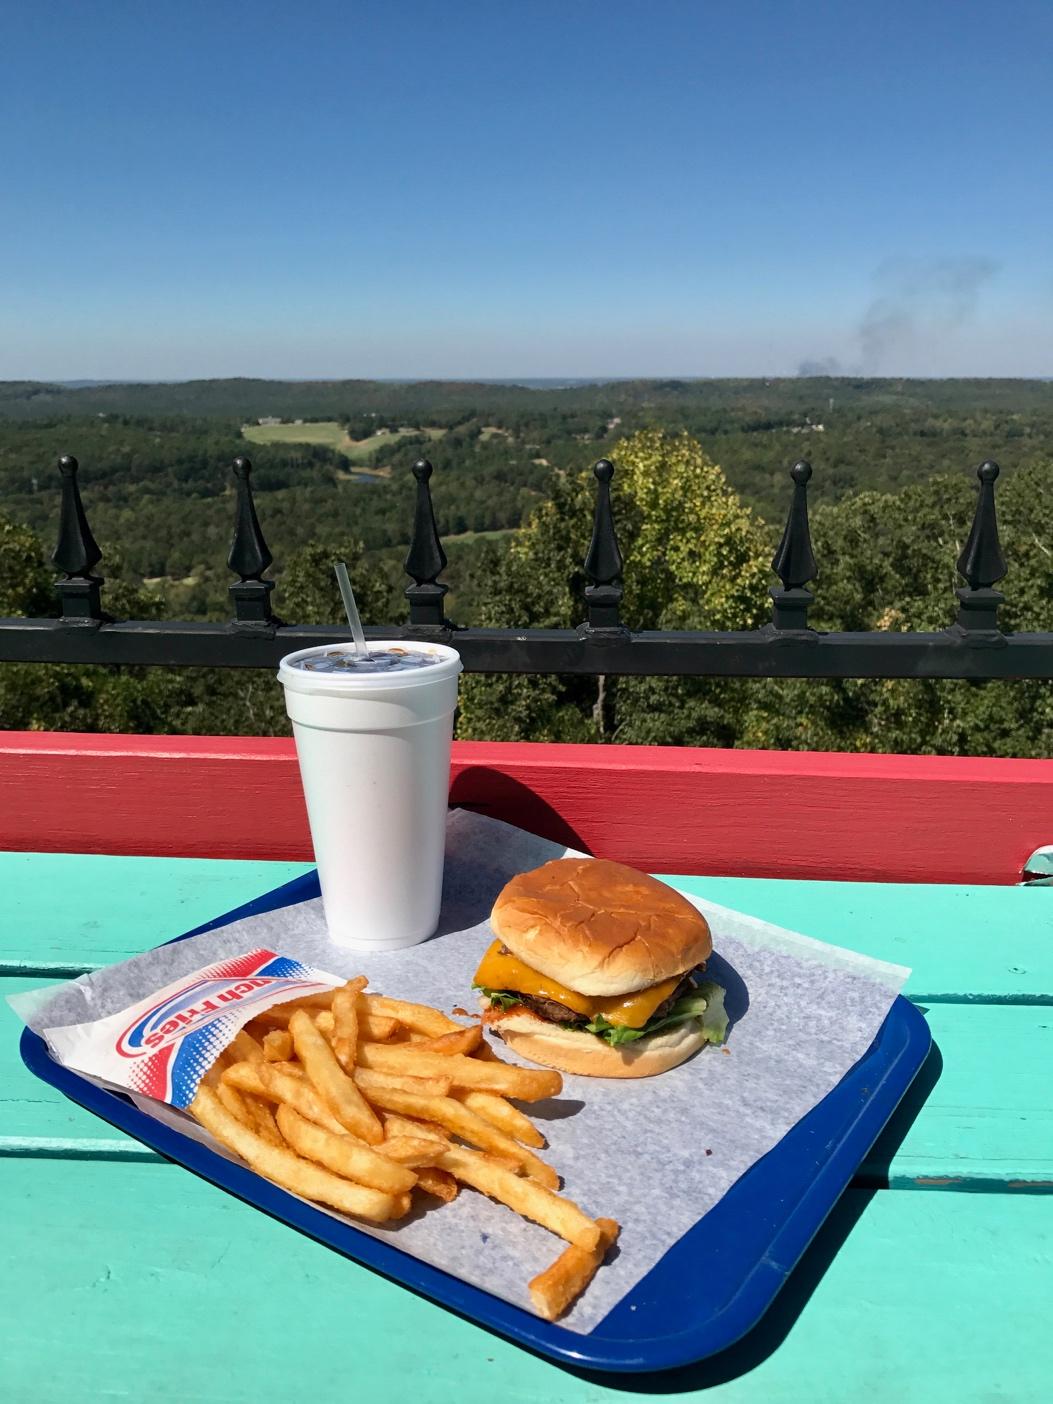 The view provided at Tip Top Grill inspires both the name and returning customers. Photo by Gavin Gilliland